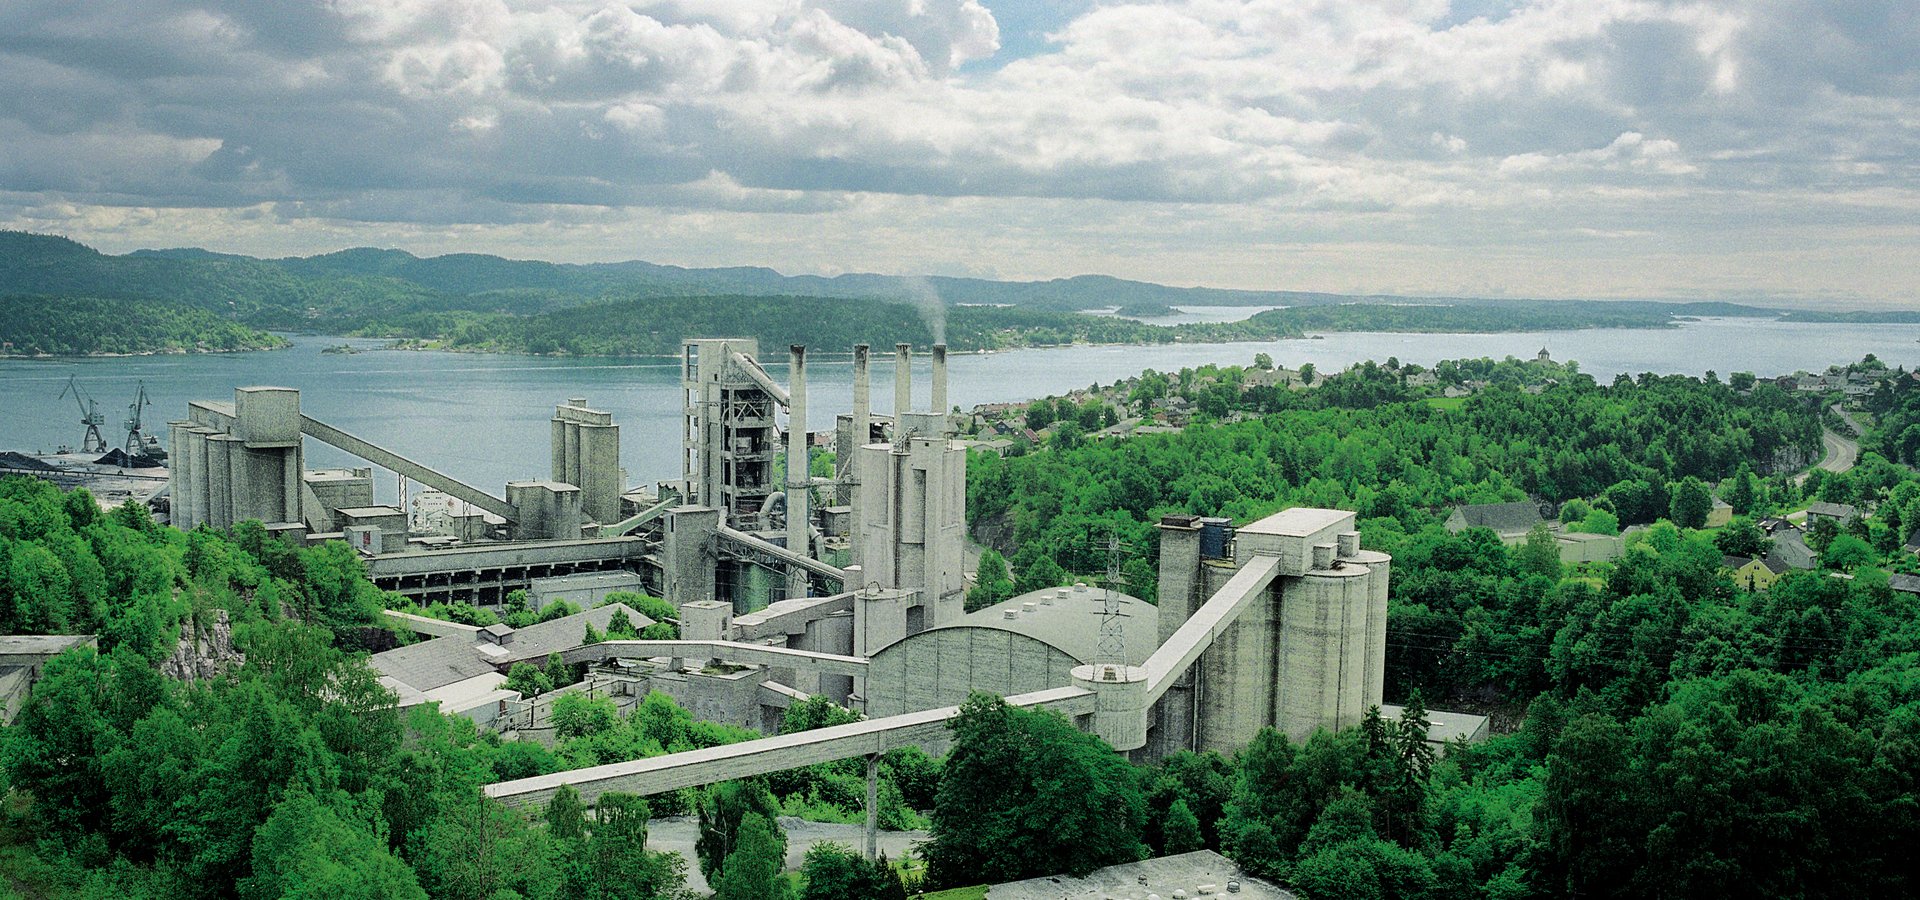 A cement plant surrounded by woodlands and lakes